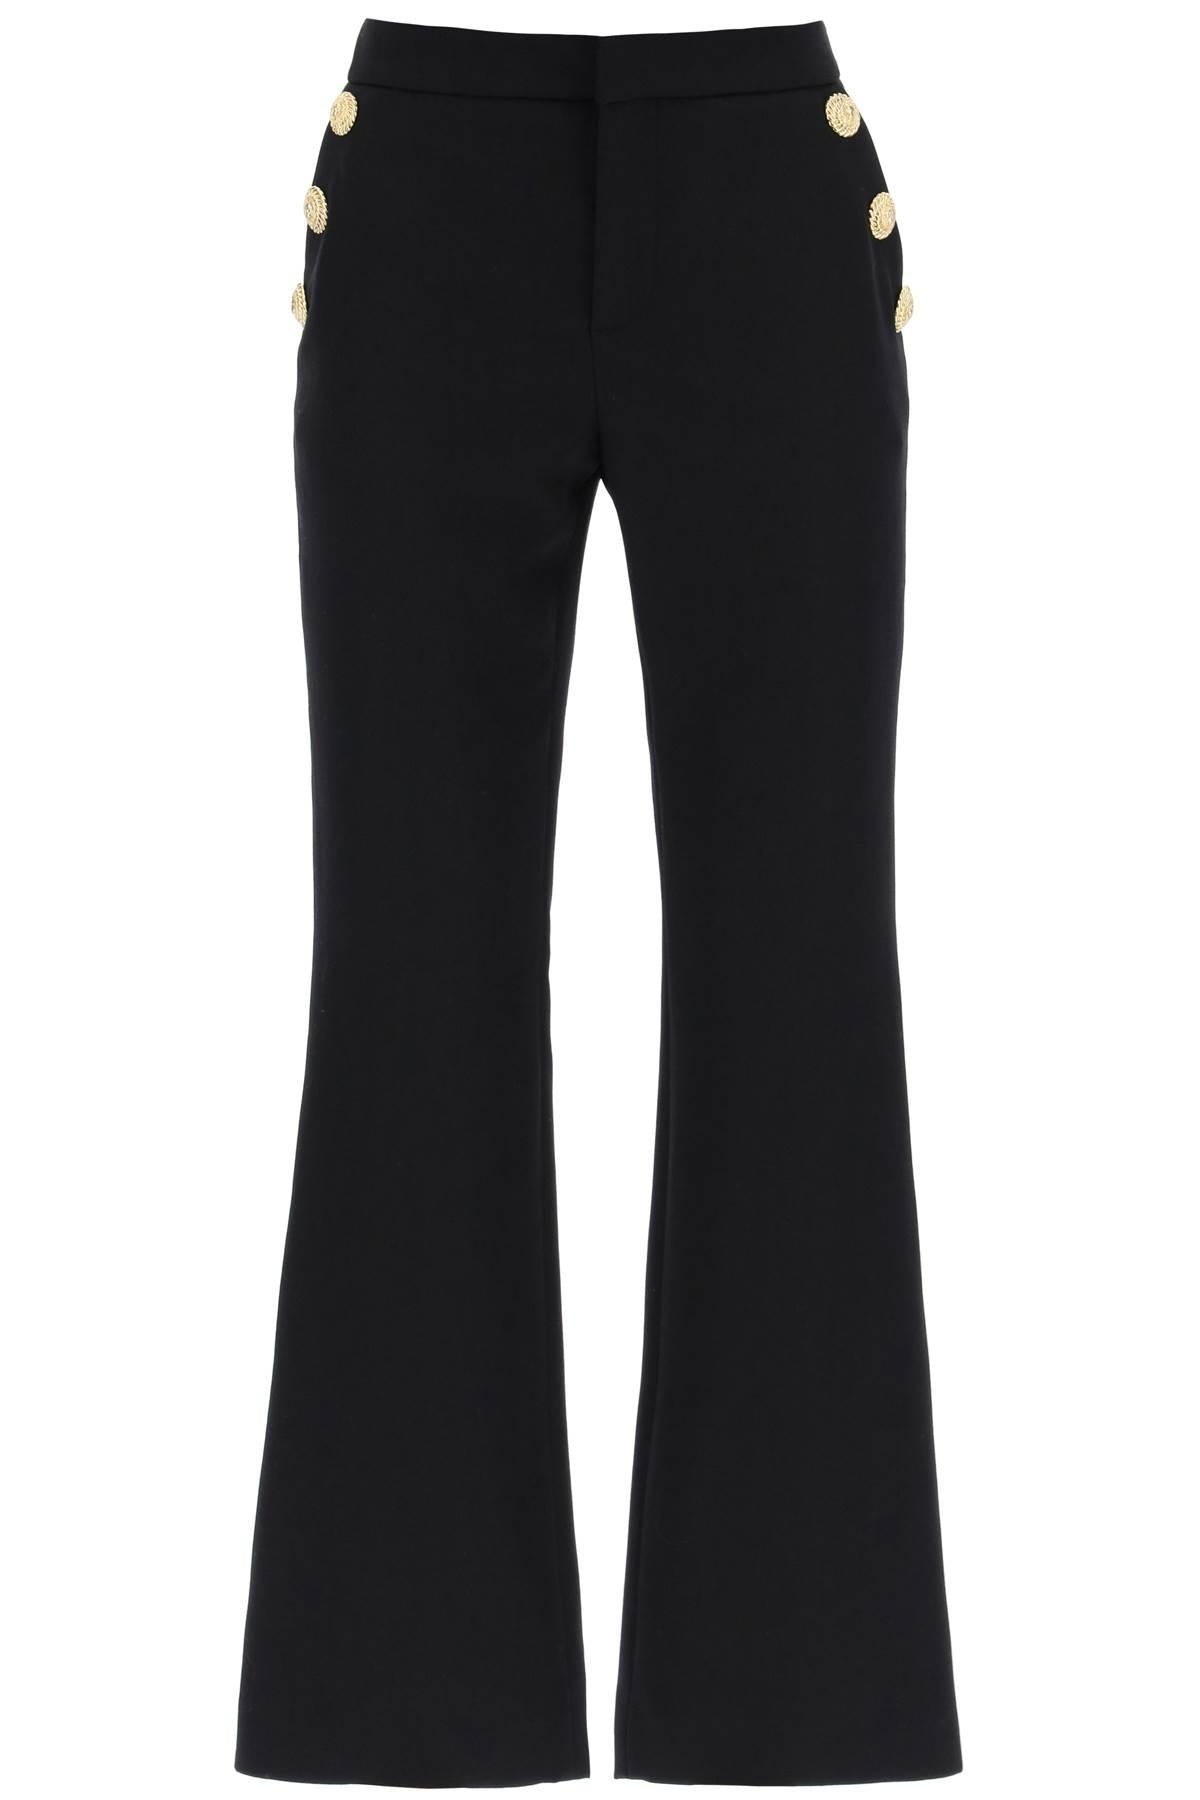 Balmain Flared Pants With Embossed Buttons - 1